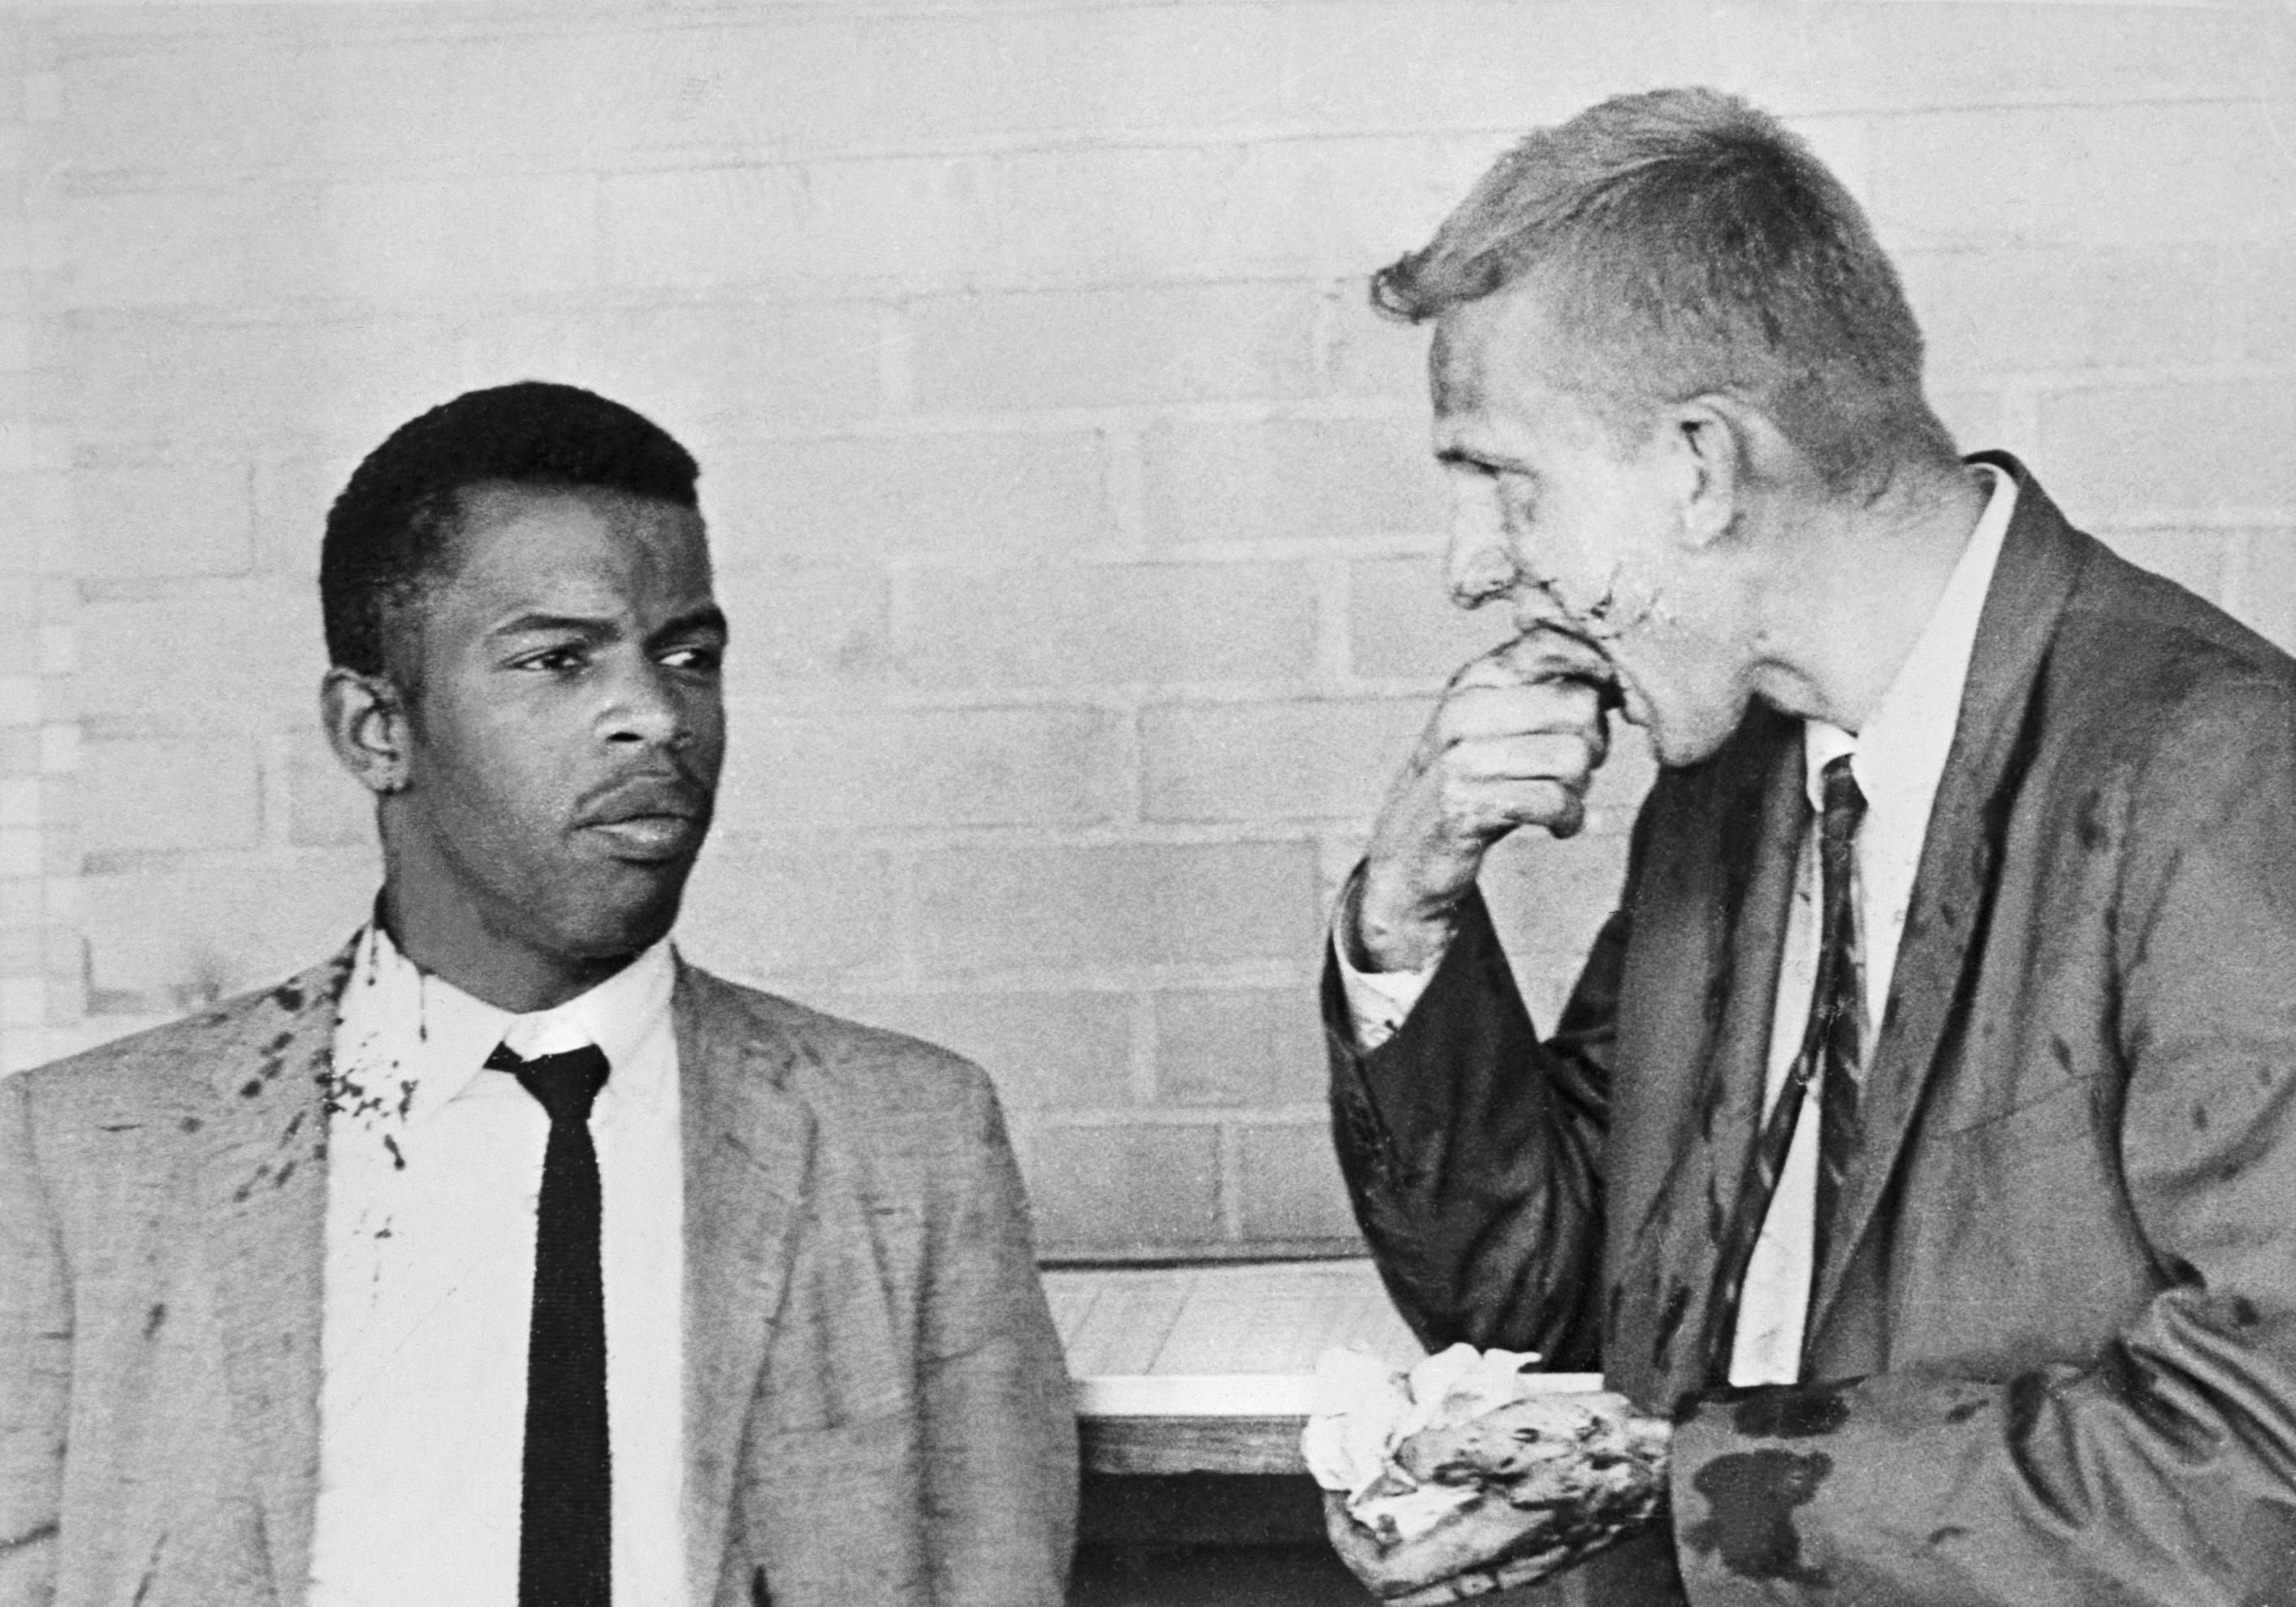 Two blood-splattered Freedom Riders, John Lewis (1940 - 2020) and James Zwerg, stand together after being attacked and beaten by pro-segregationists in Montgomery, Alabama, on May 20, 1961. (Photo: Bettmann via Getty Images)